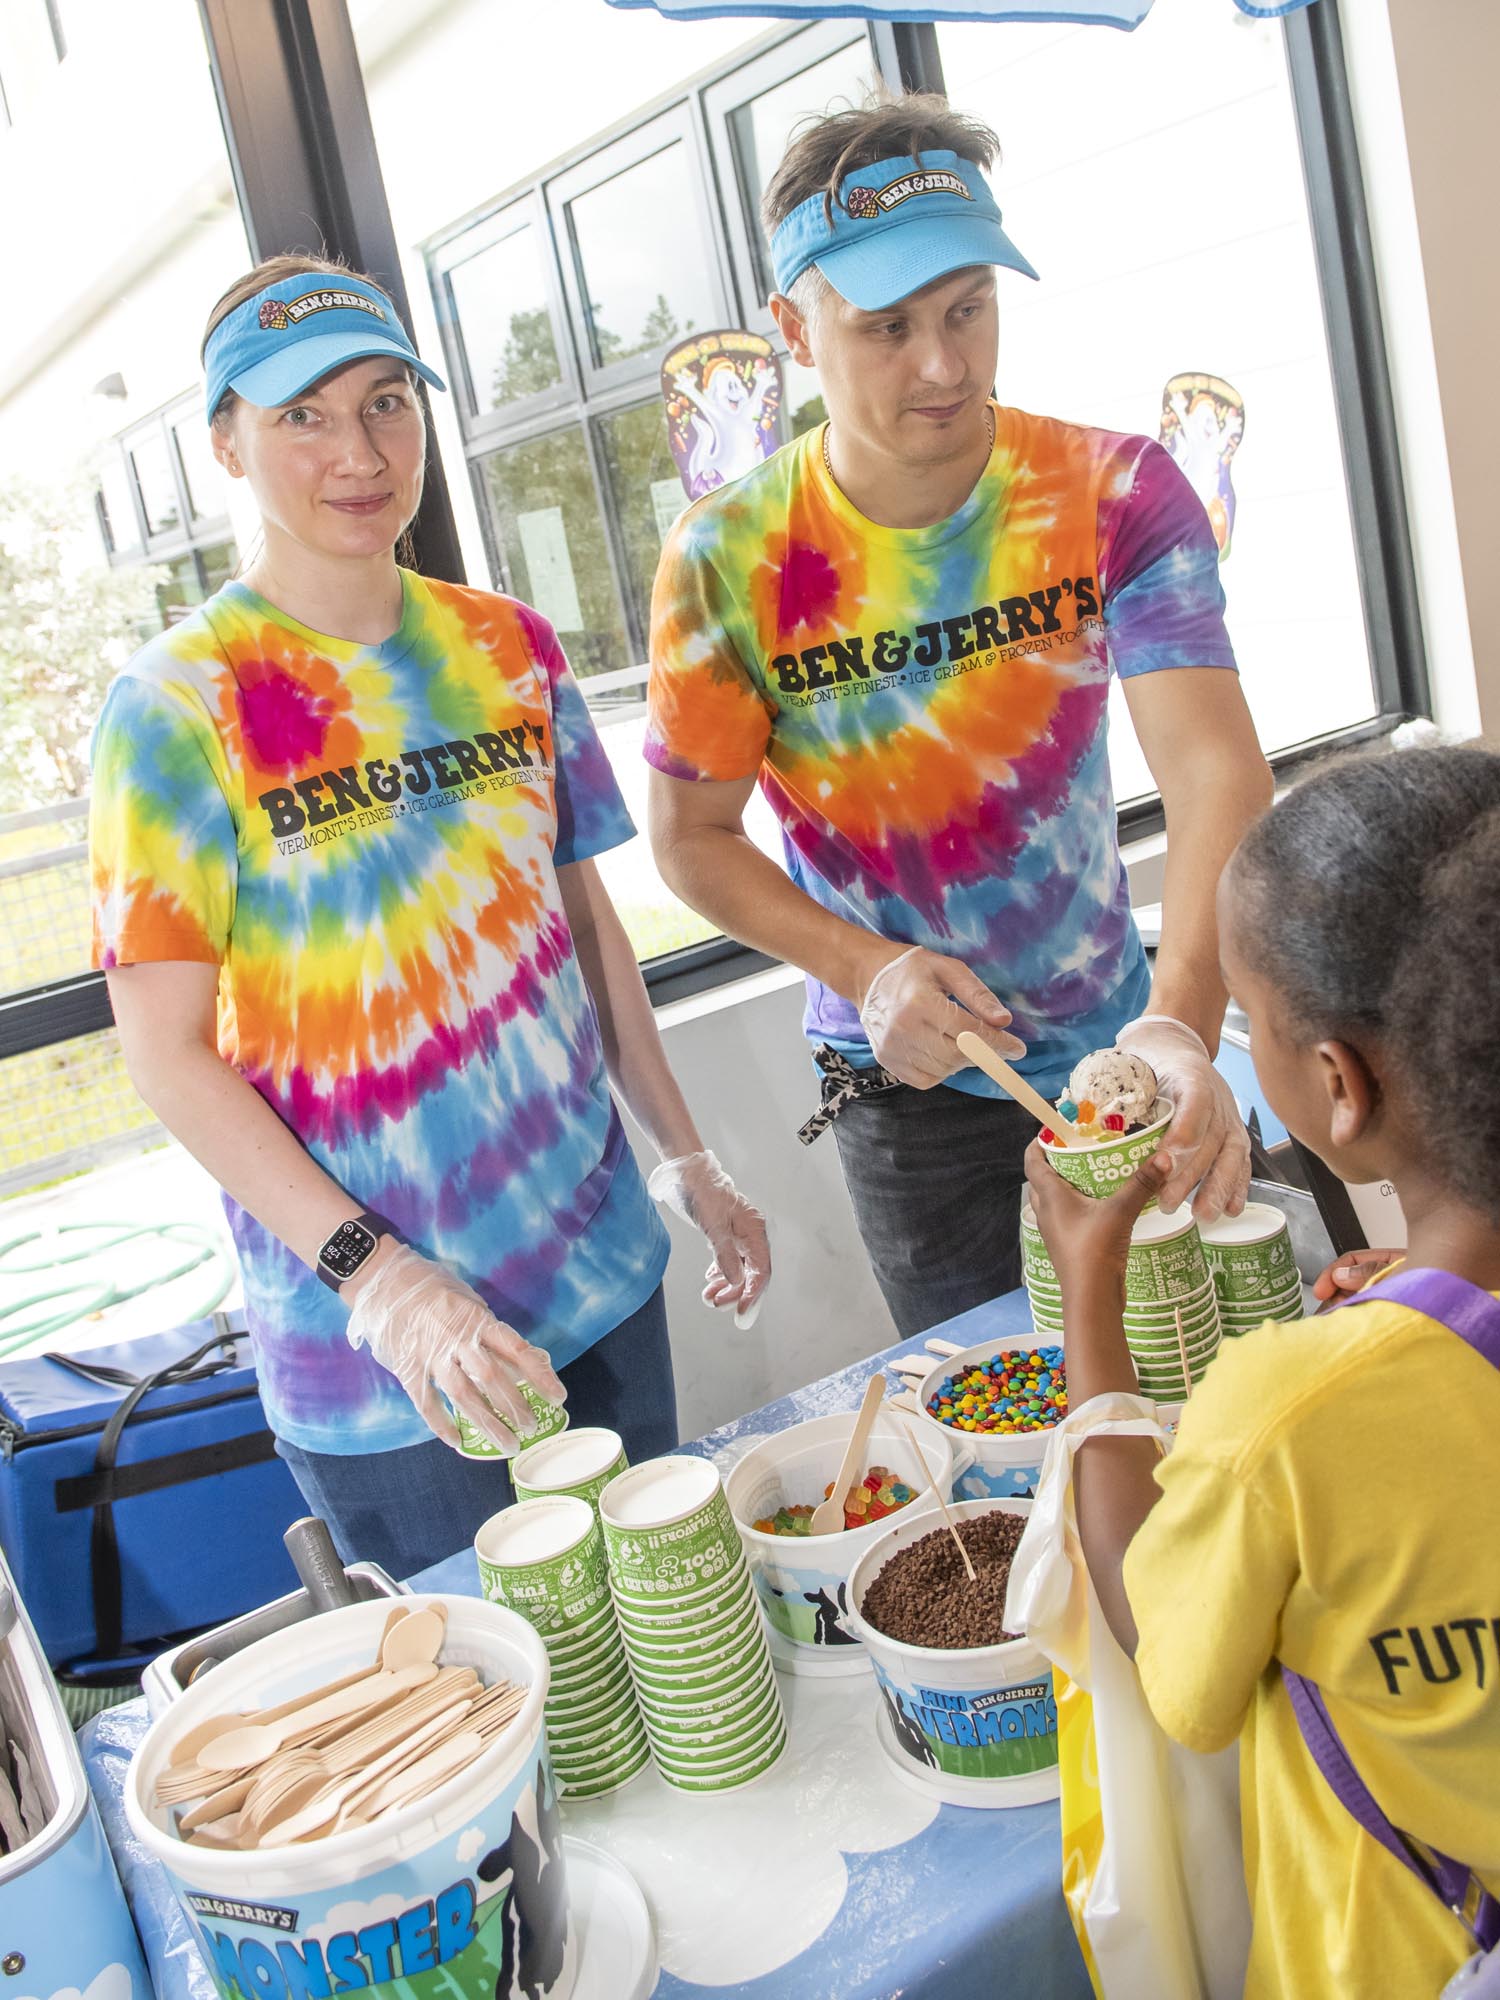 Representatives from Ben and Jerry's serve ice cream to the OYC students during Fall festivities